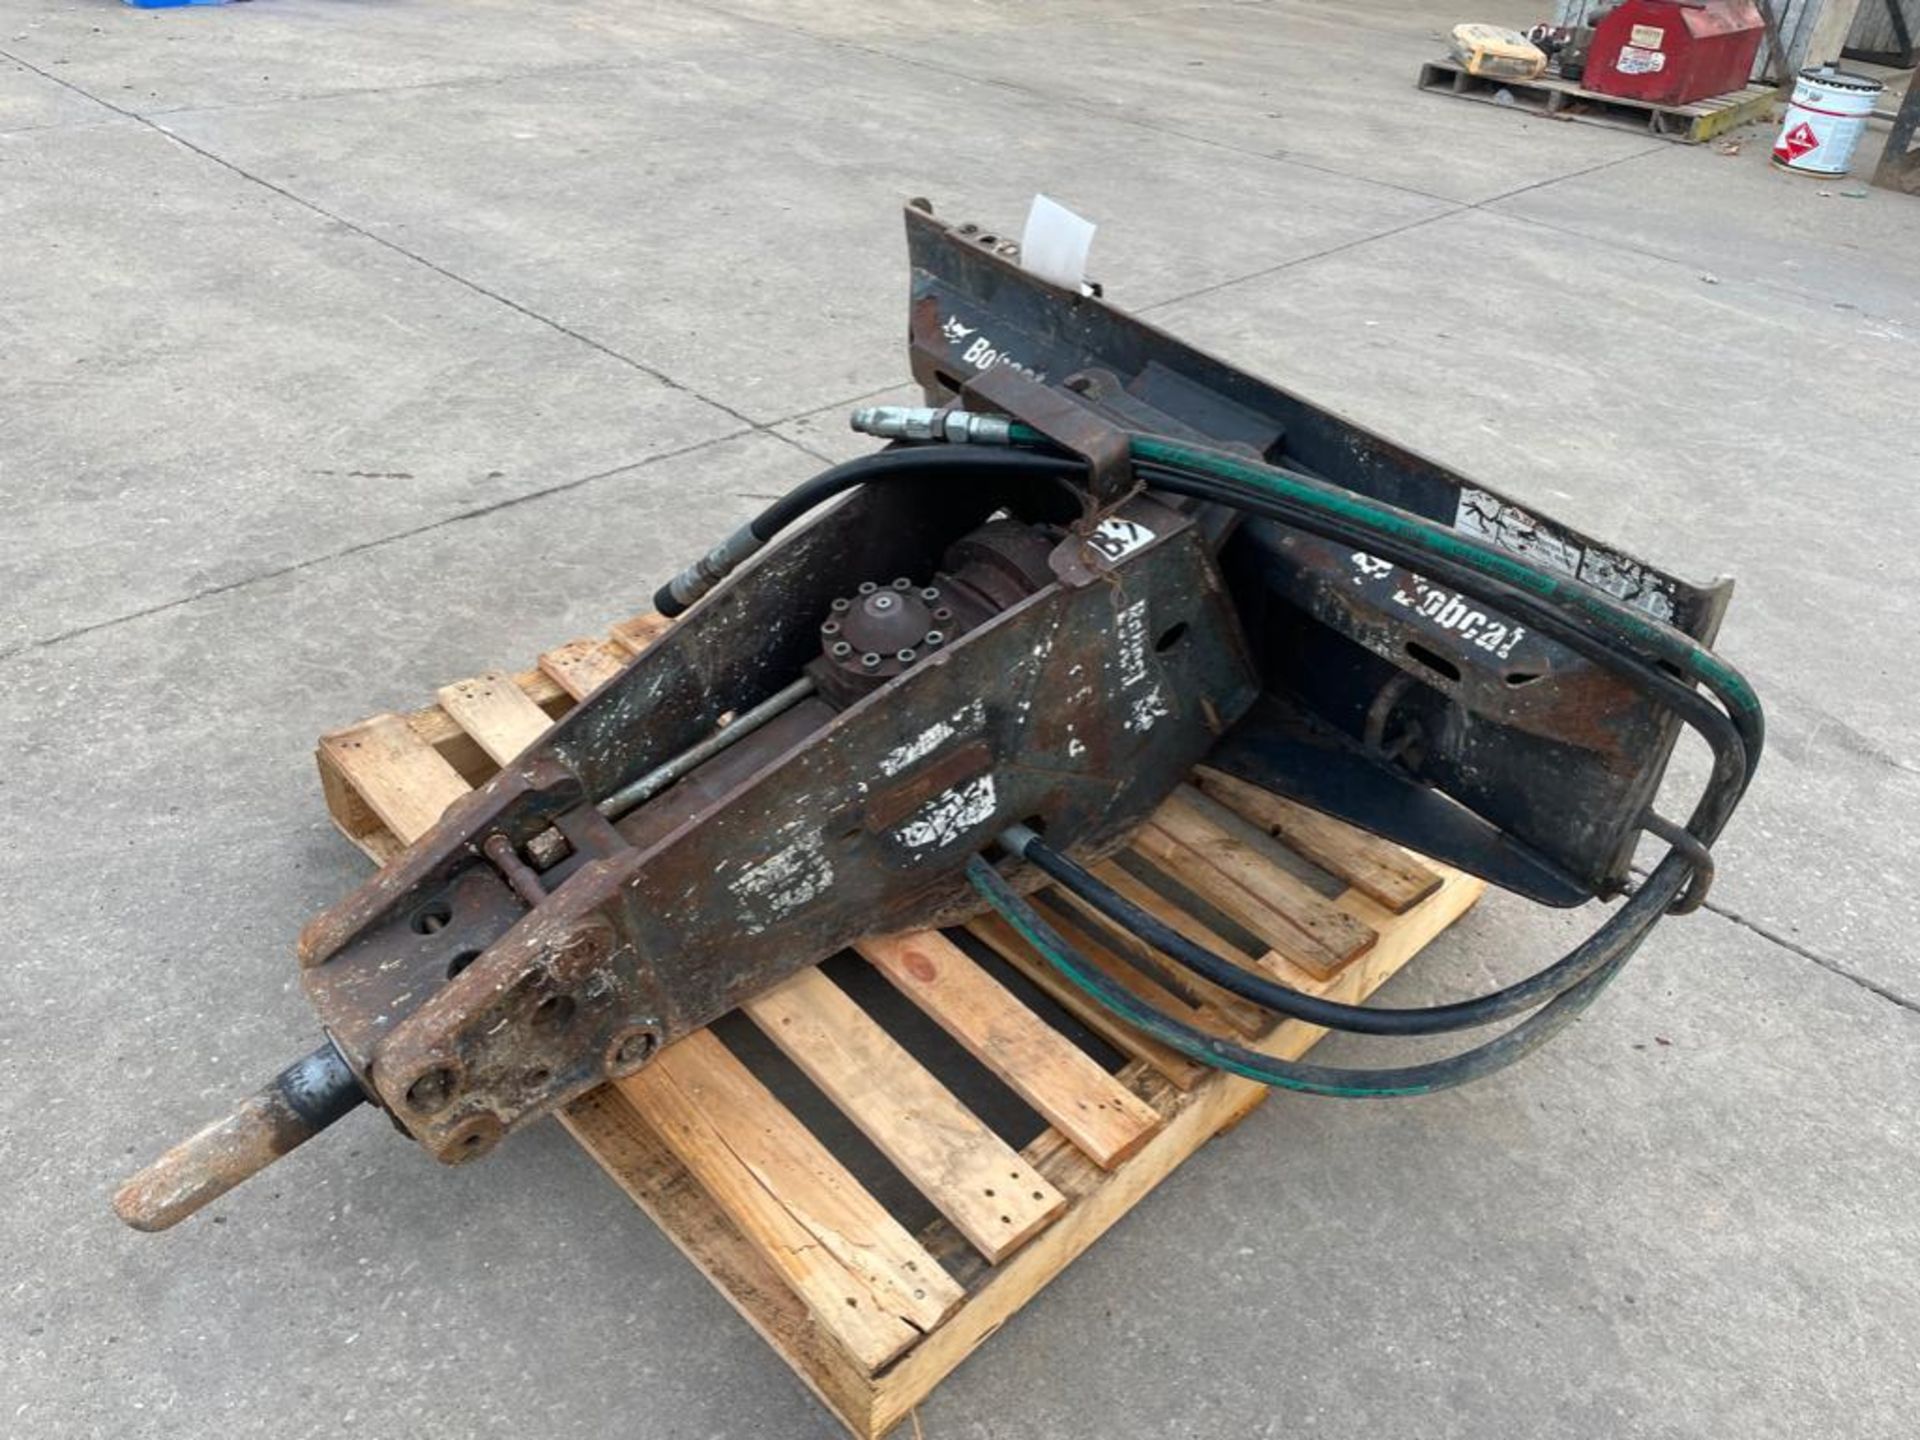 Bobcat Skid Steer Hammer Breaker Attachment. Located in Hazelwood, MO - Image 2 of 4